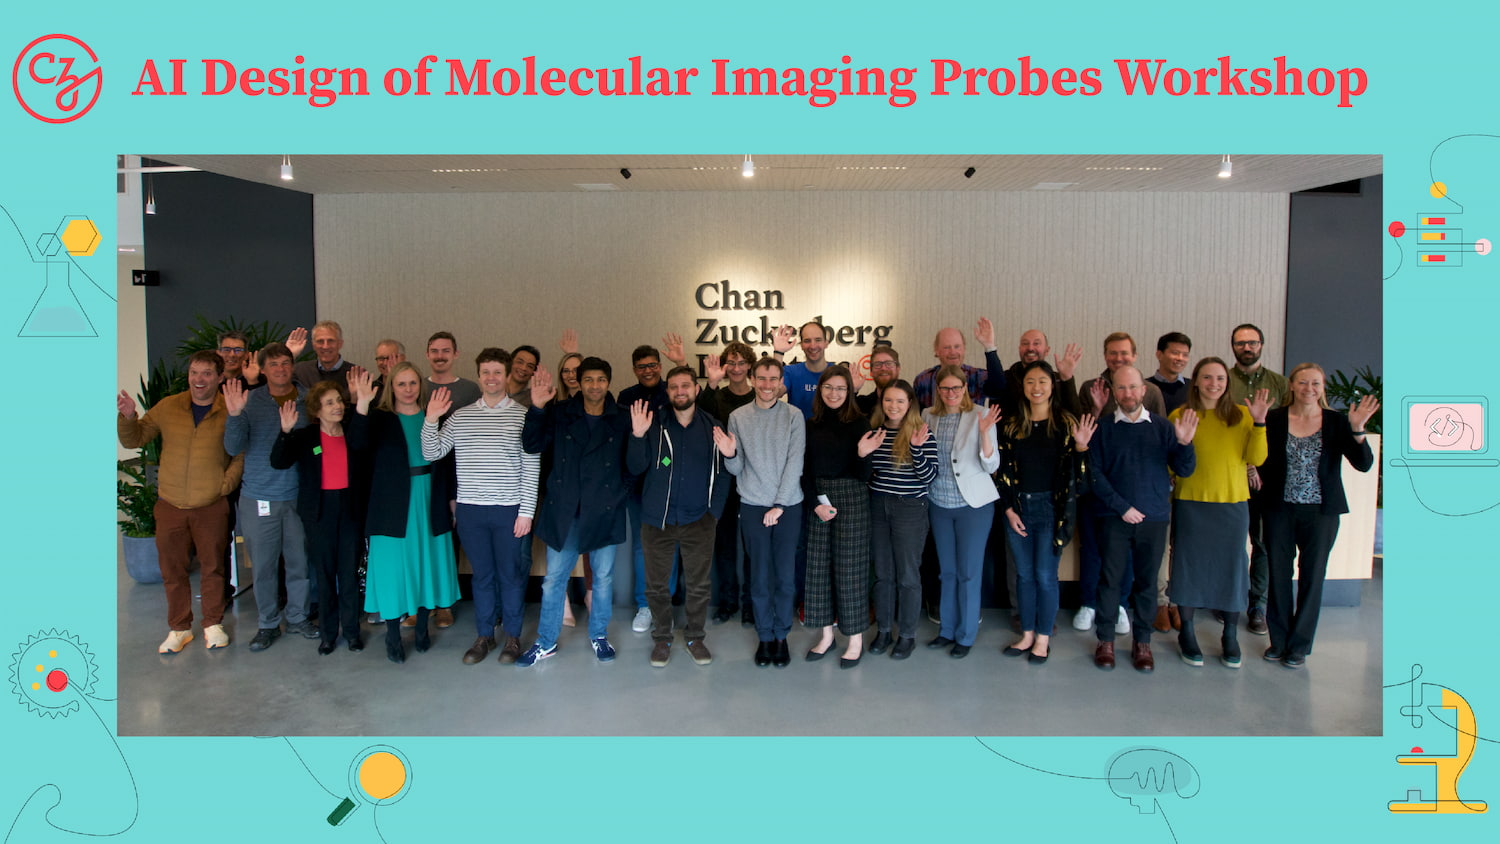 A group of participants at CZI’s AI Design of Molecular Imaging Probes Workshop pose waving in front of the CZI Office.